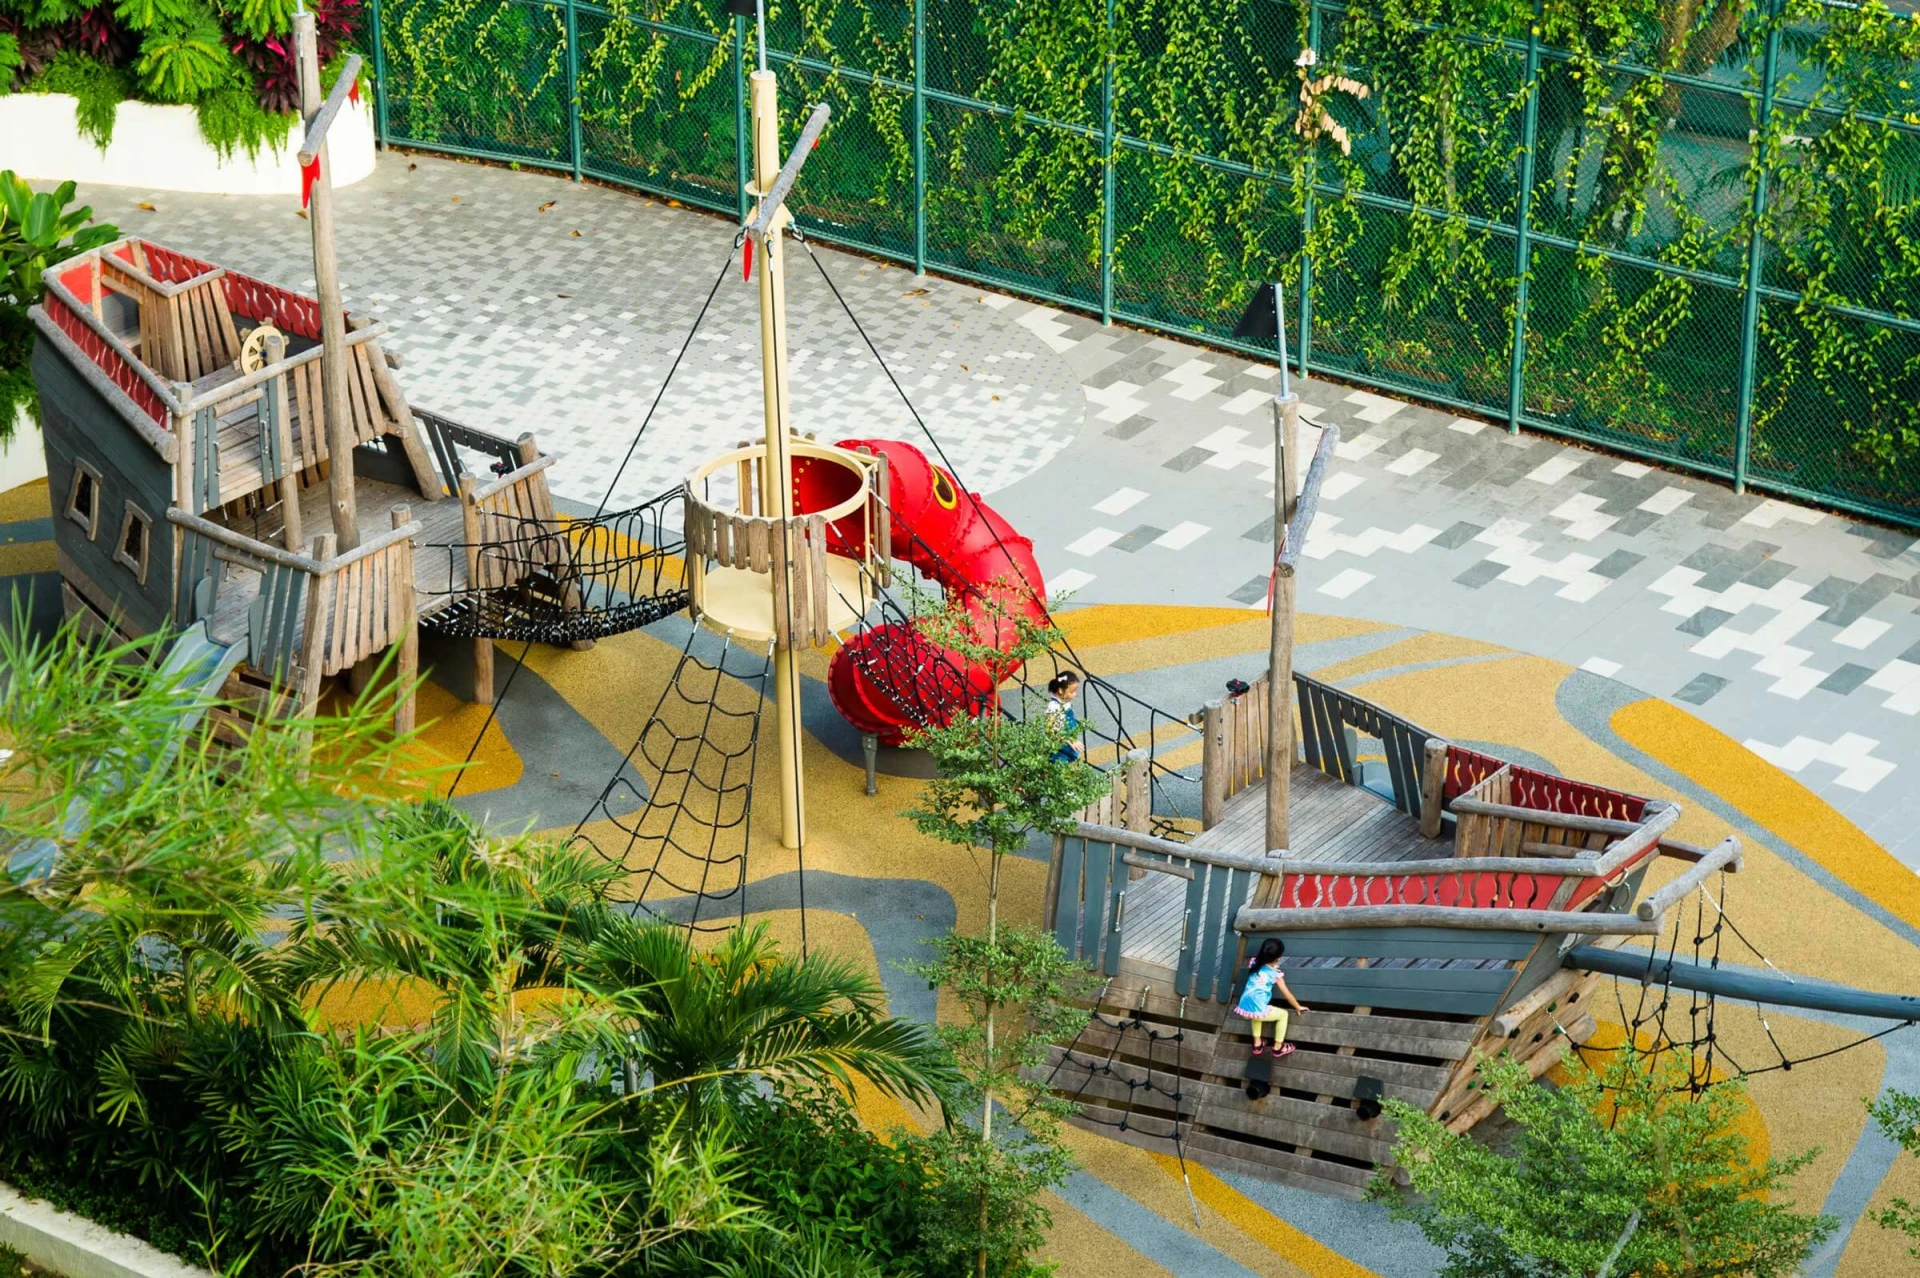 large wooden playground ship with climbing net and slide at Shangri-La hotel